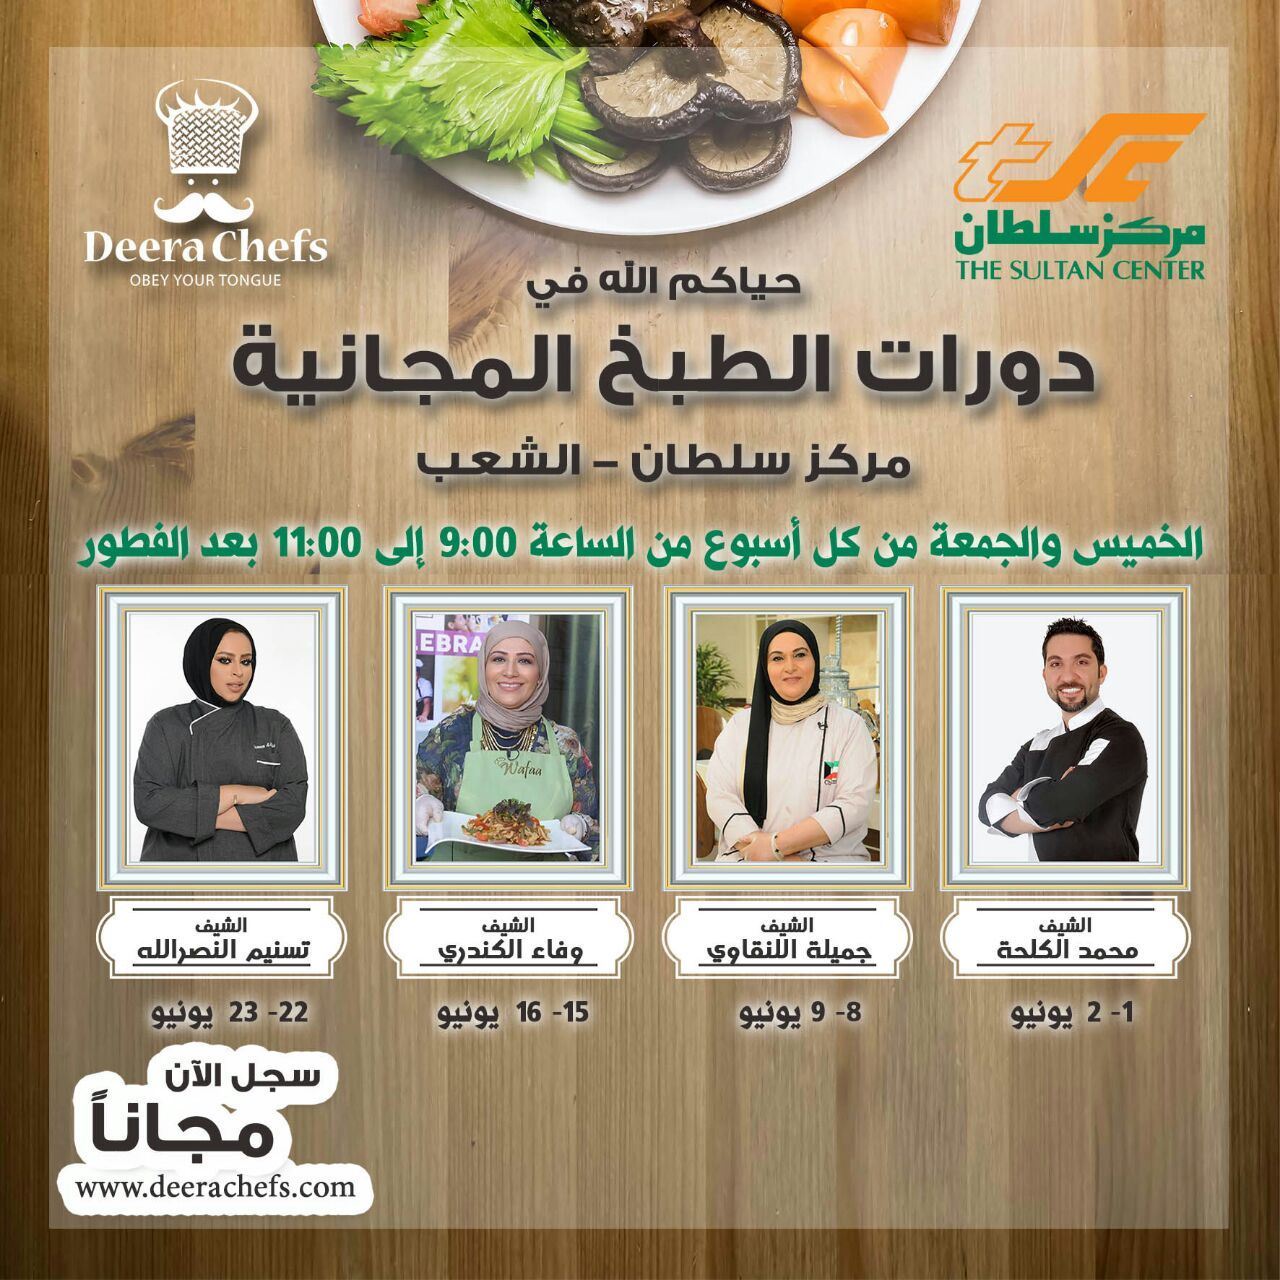 The Sultan Center Launches Cooking Sessions with Deera Chefs